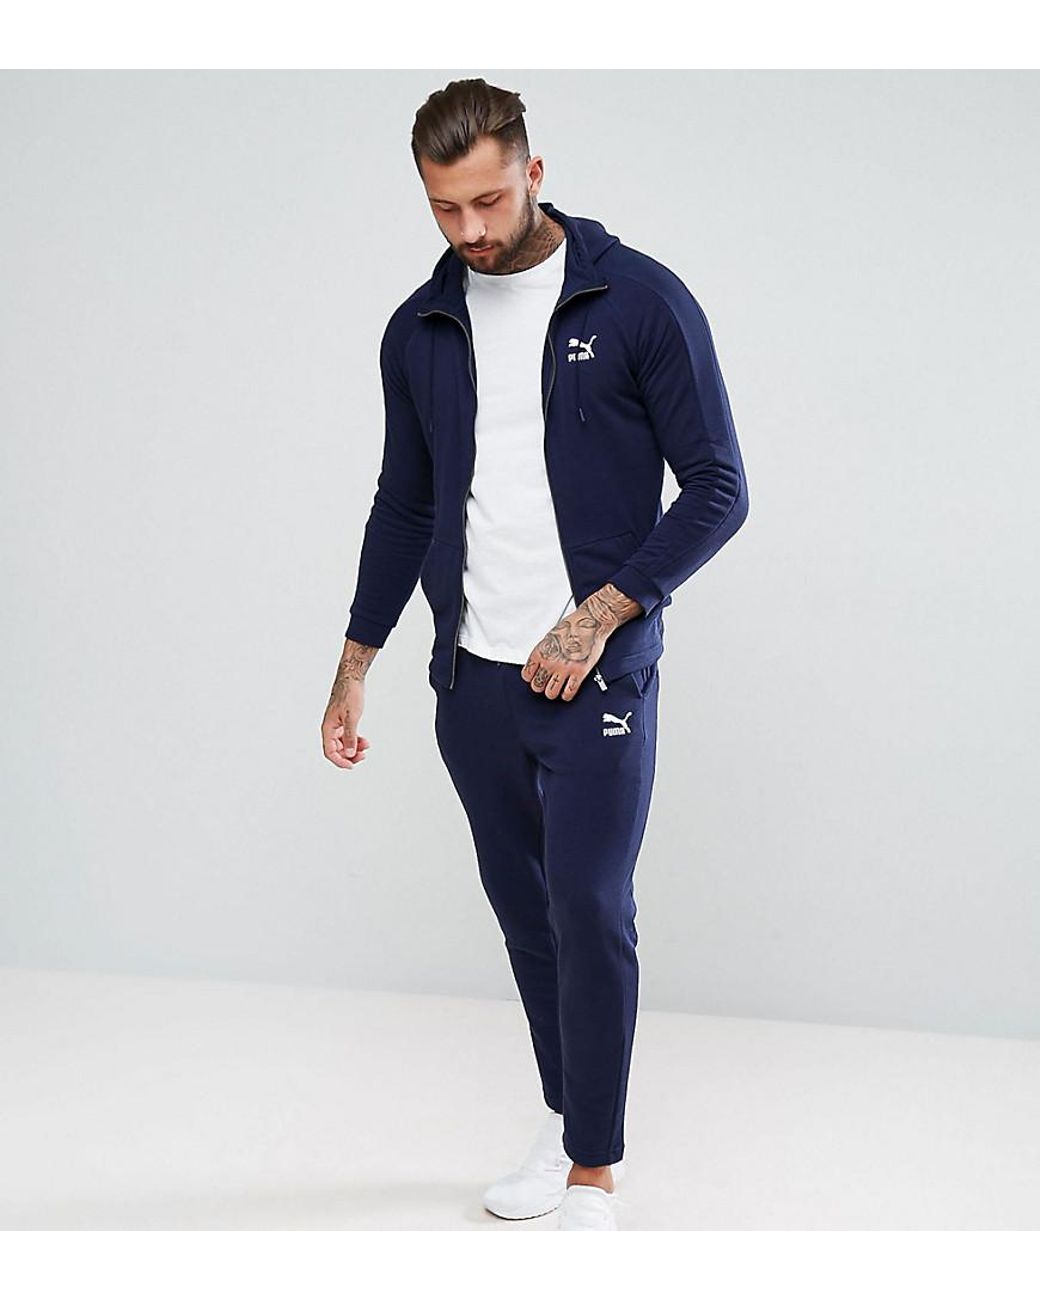 PUMA Tracksuit Set In Navy Exclusive To Asos in Blue for Men | Lyst